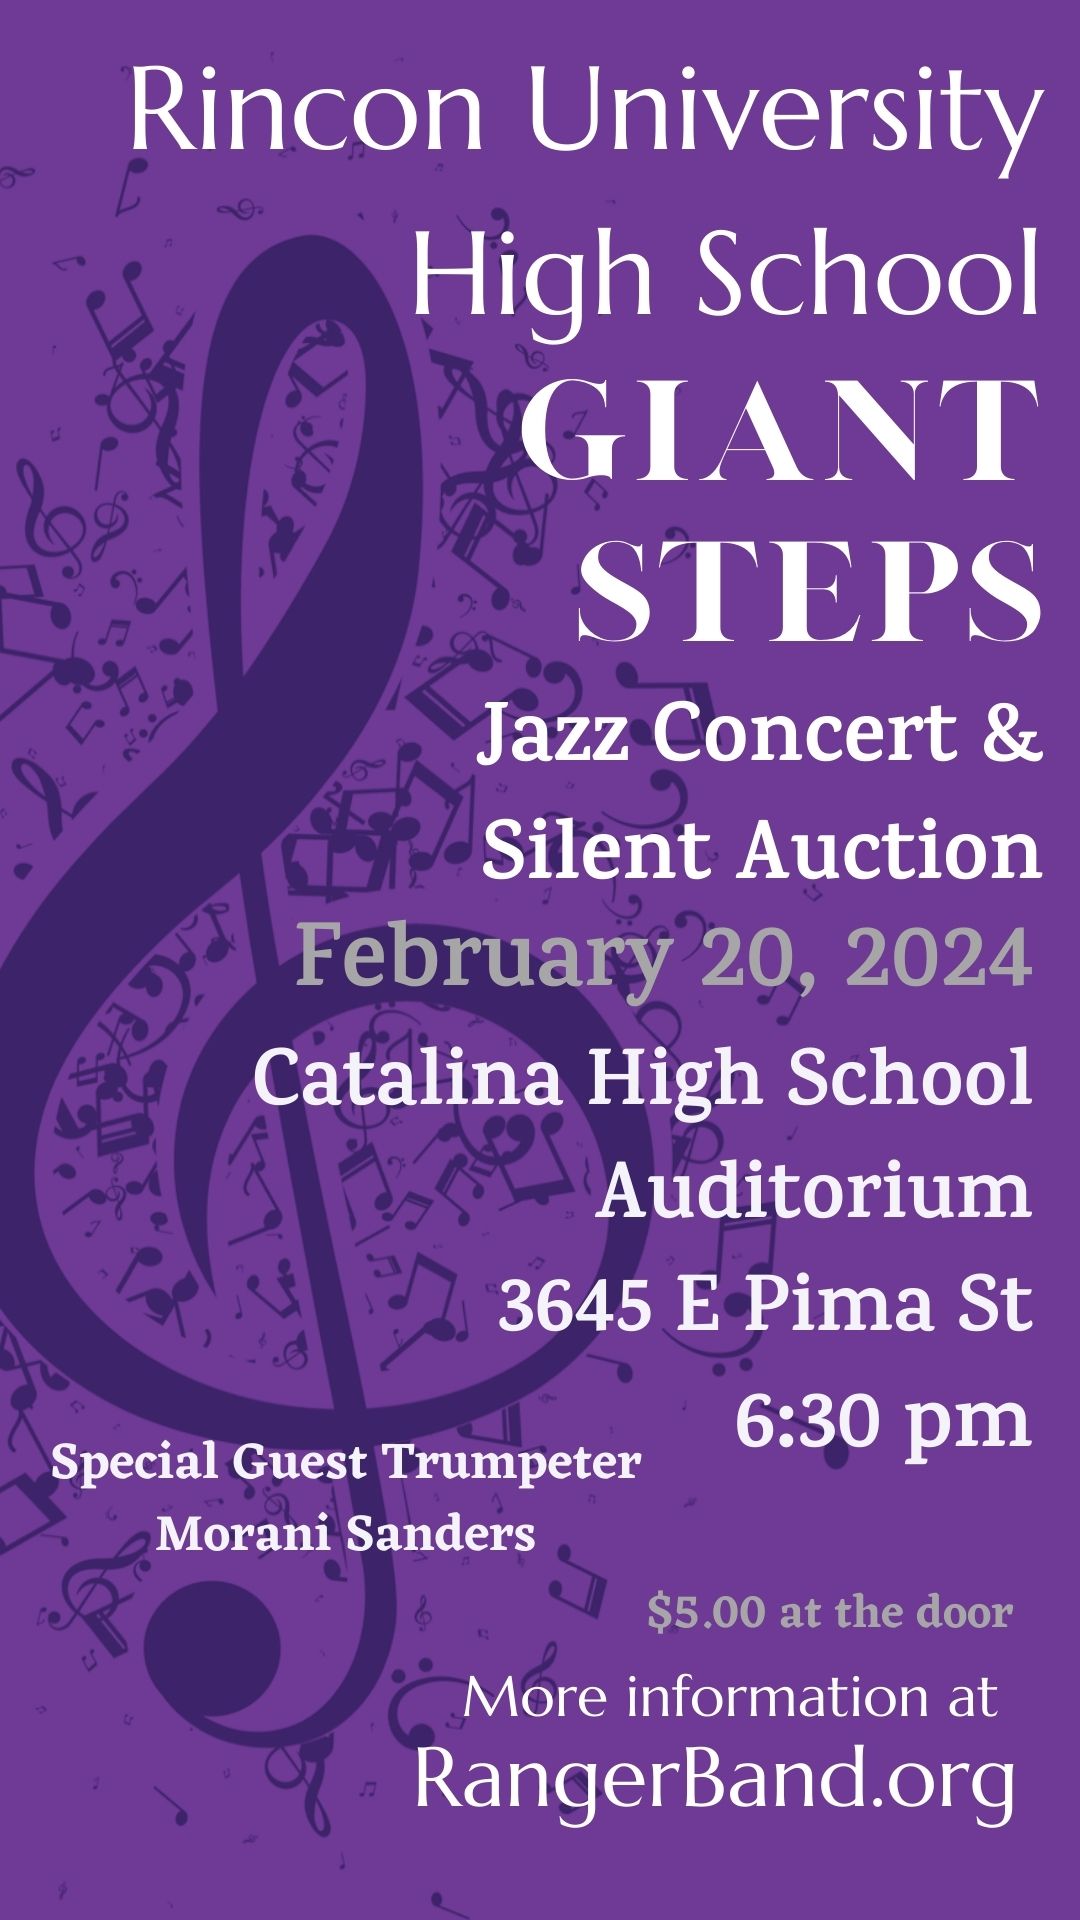 Giant Steps Jazz Concert and Silent Auction 